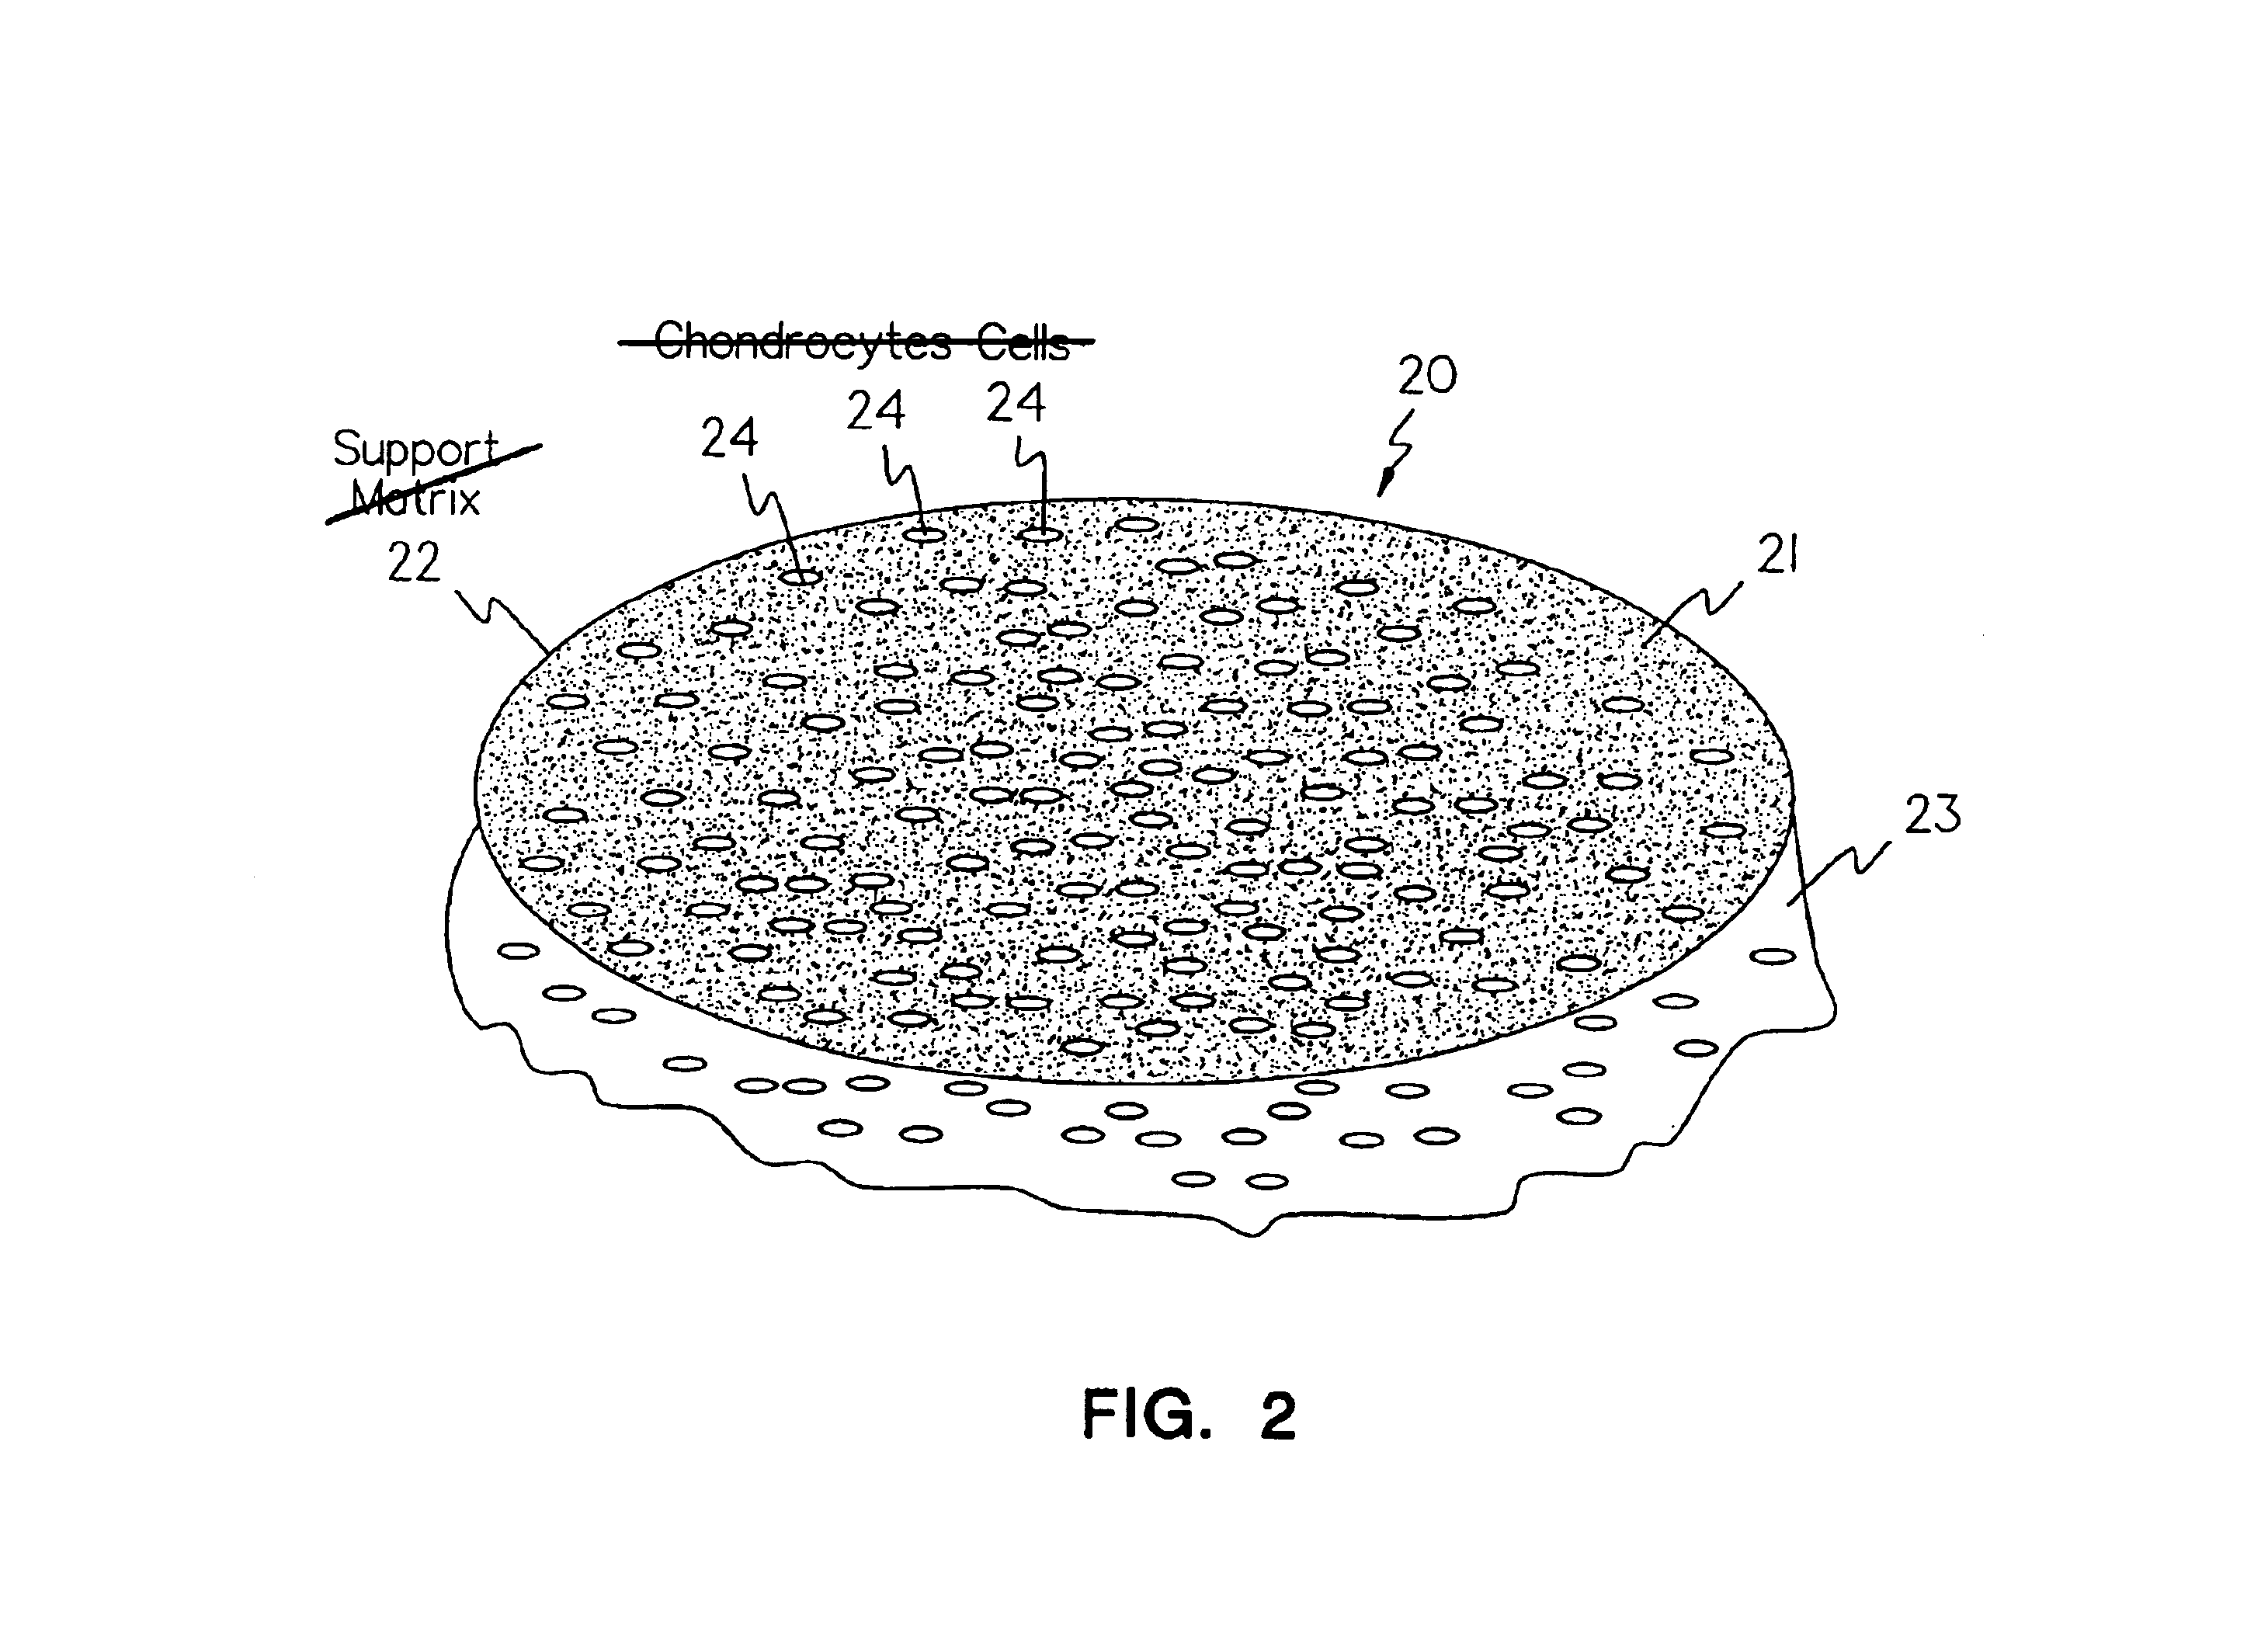 Methods, instruments and materials for chondrocyte cell transplantation